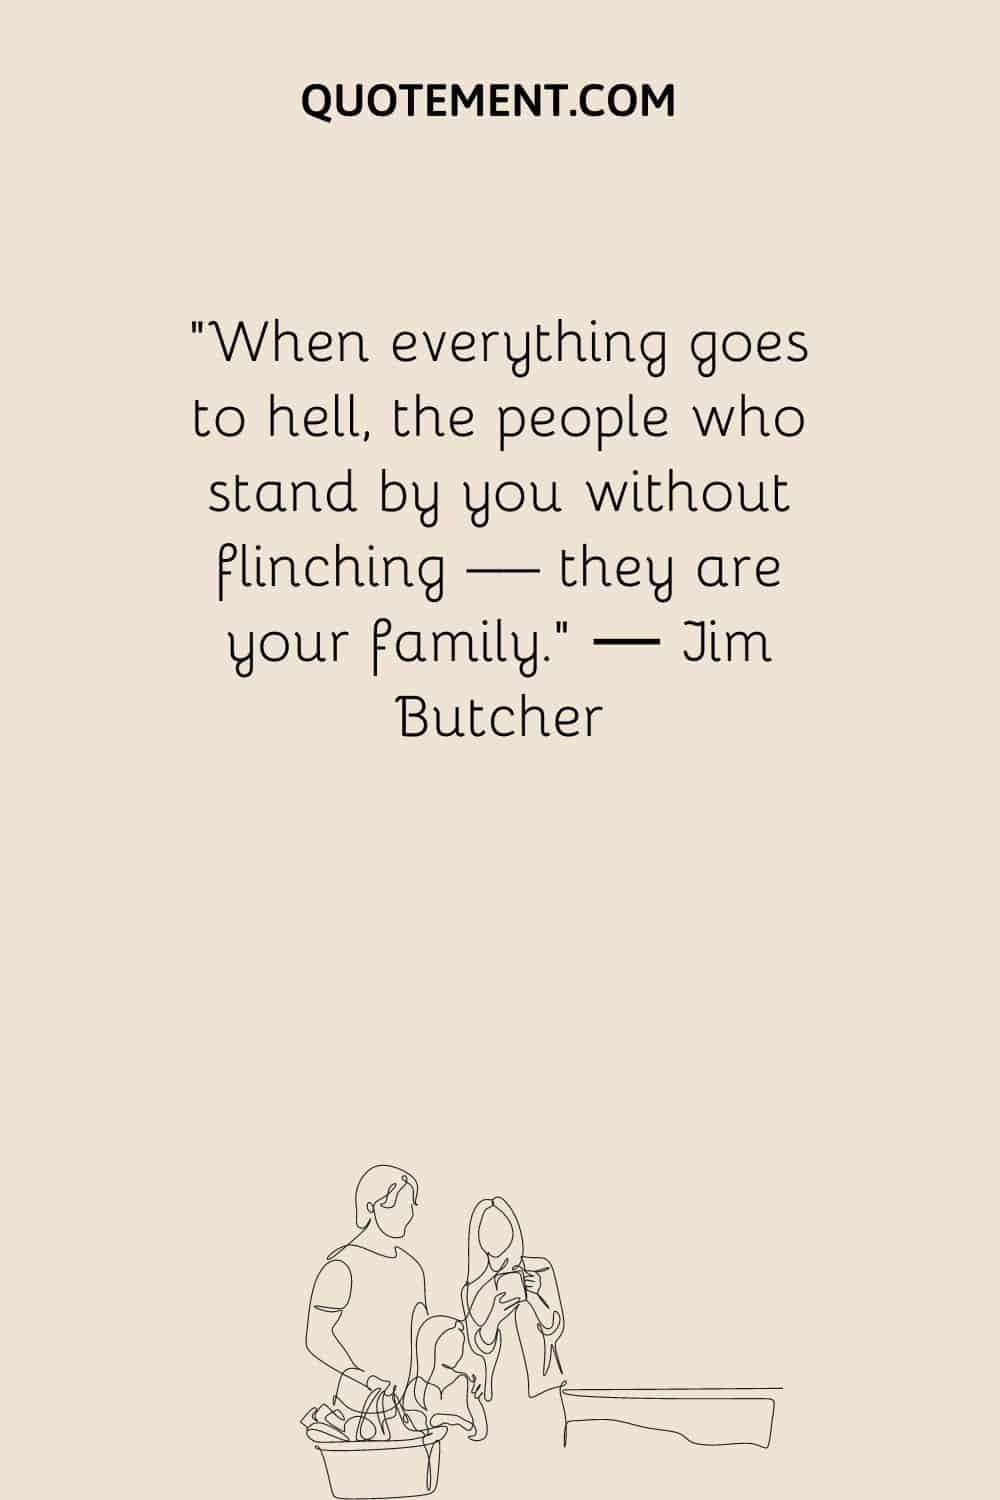 When everything goes to hell, the people who stand by you without flinching